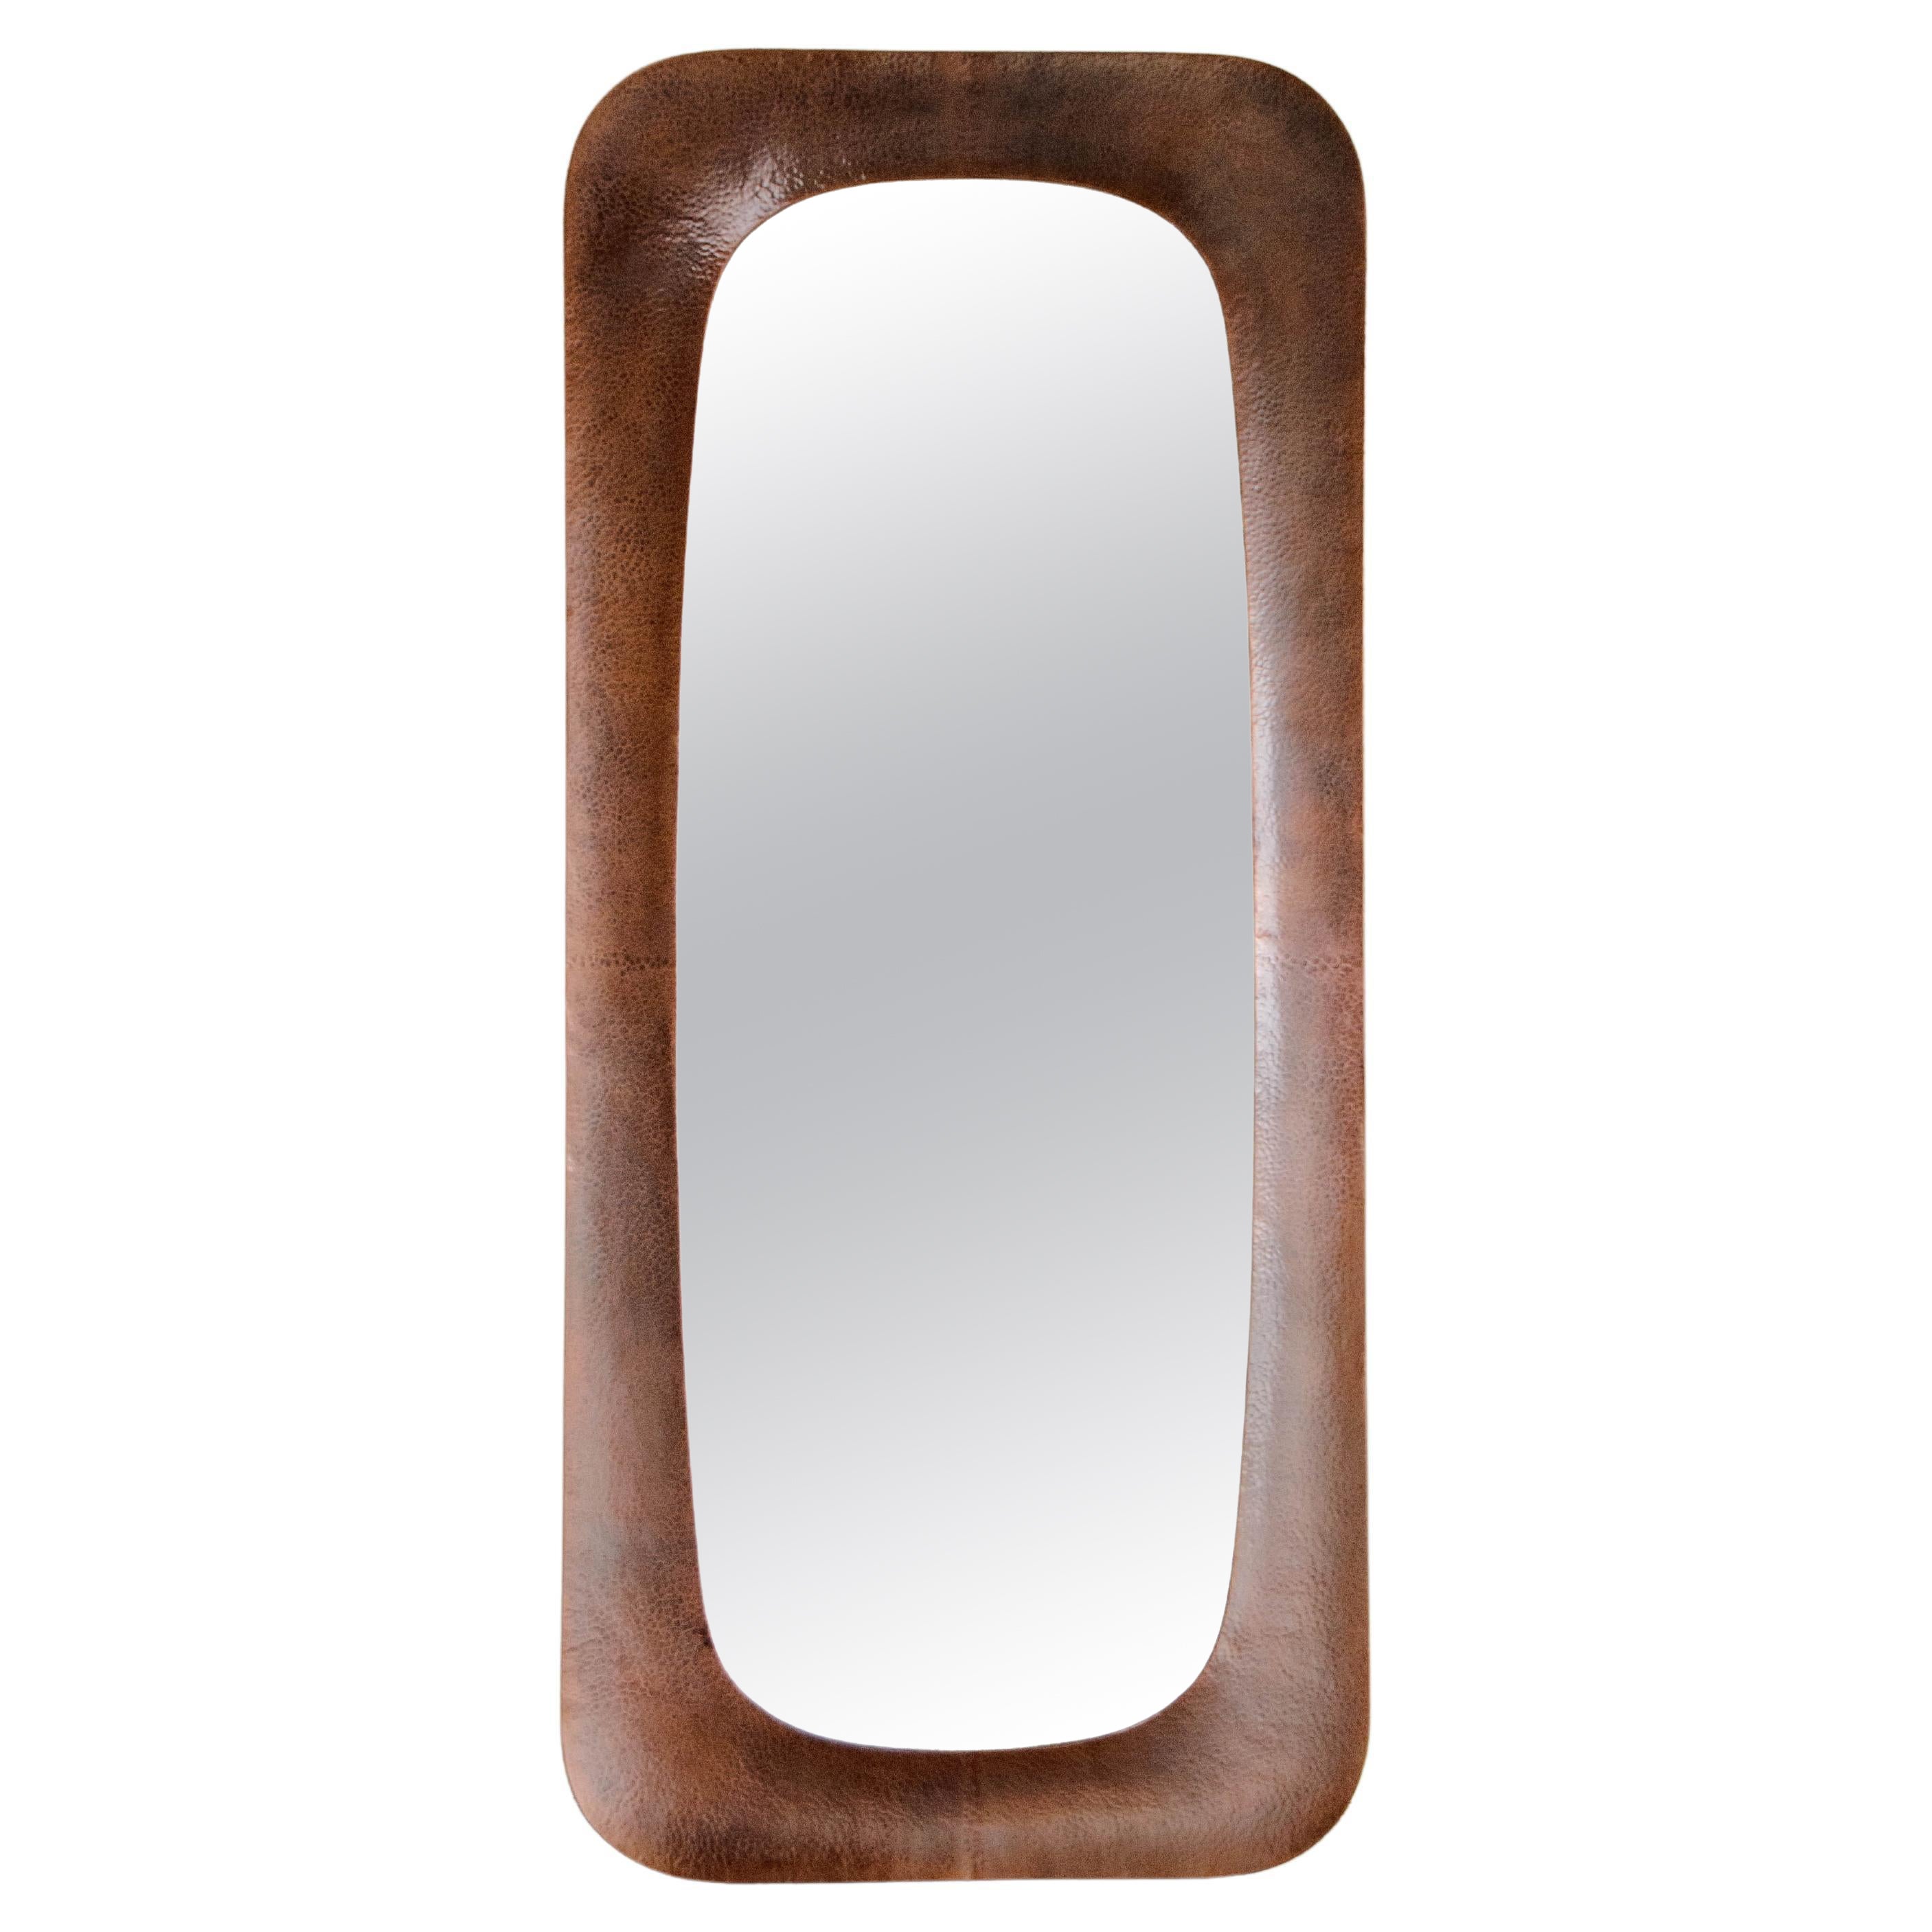 Contemporary "O" Mirror in Antique Copper by Robert Kuo, Hand Repoussé